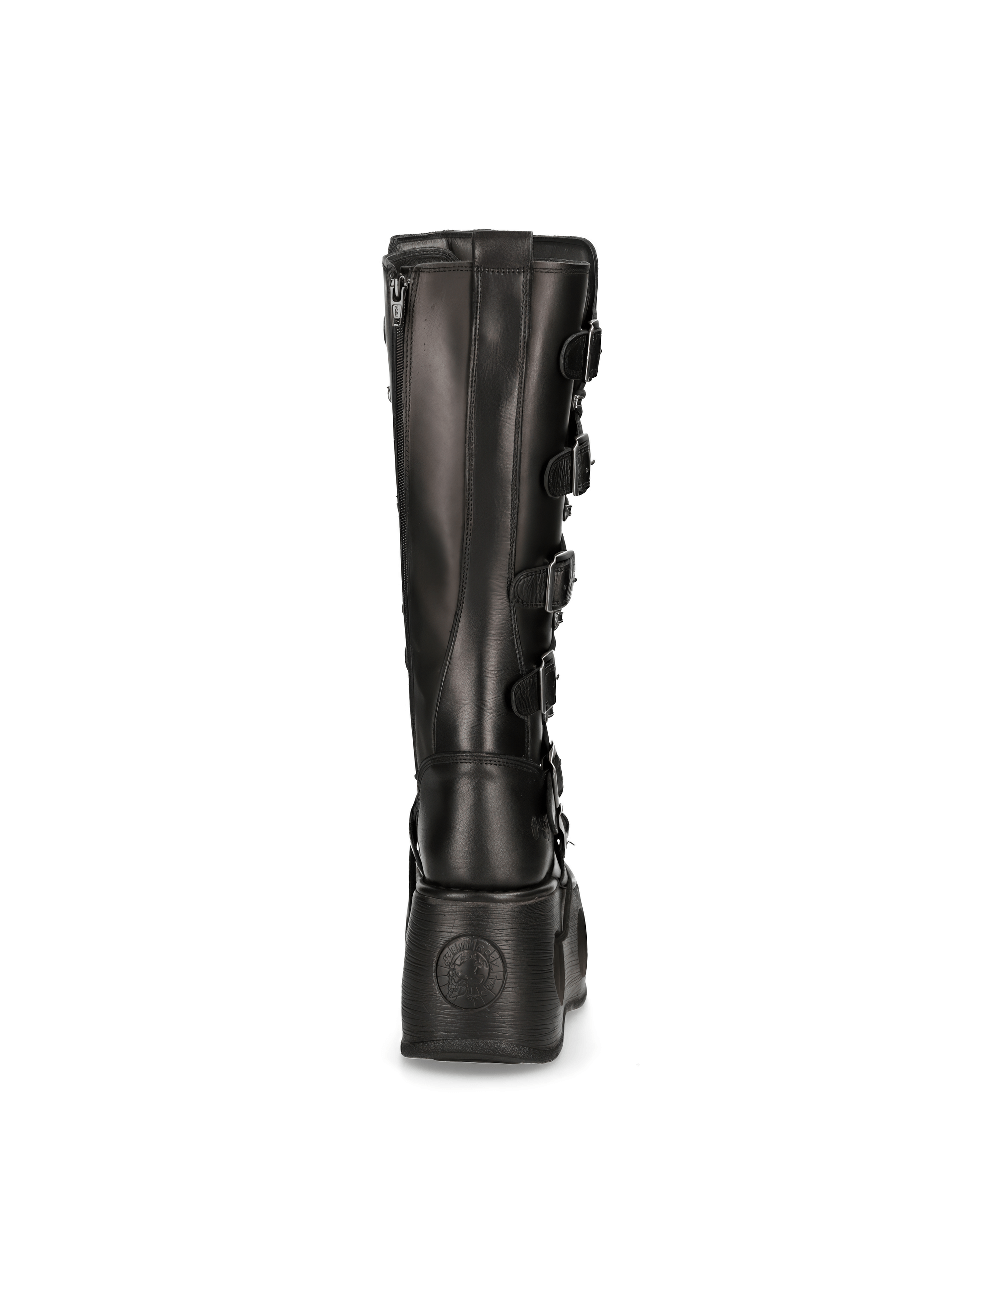 NEW ROCK Gothic Style High Platform Boots with Buckles